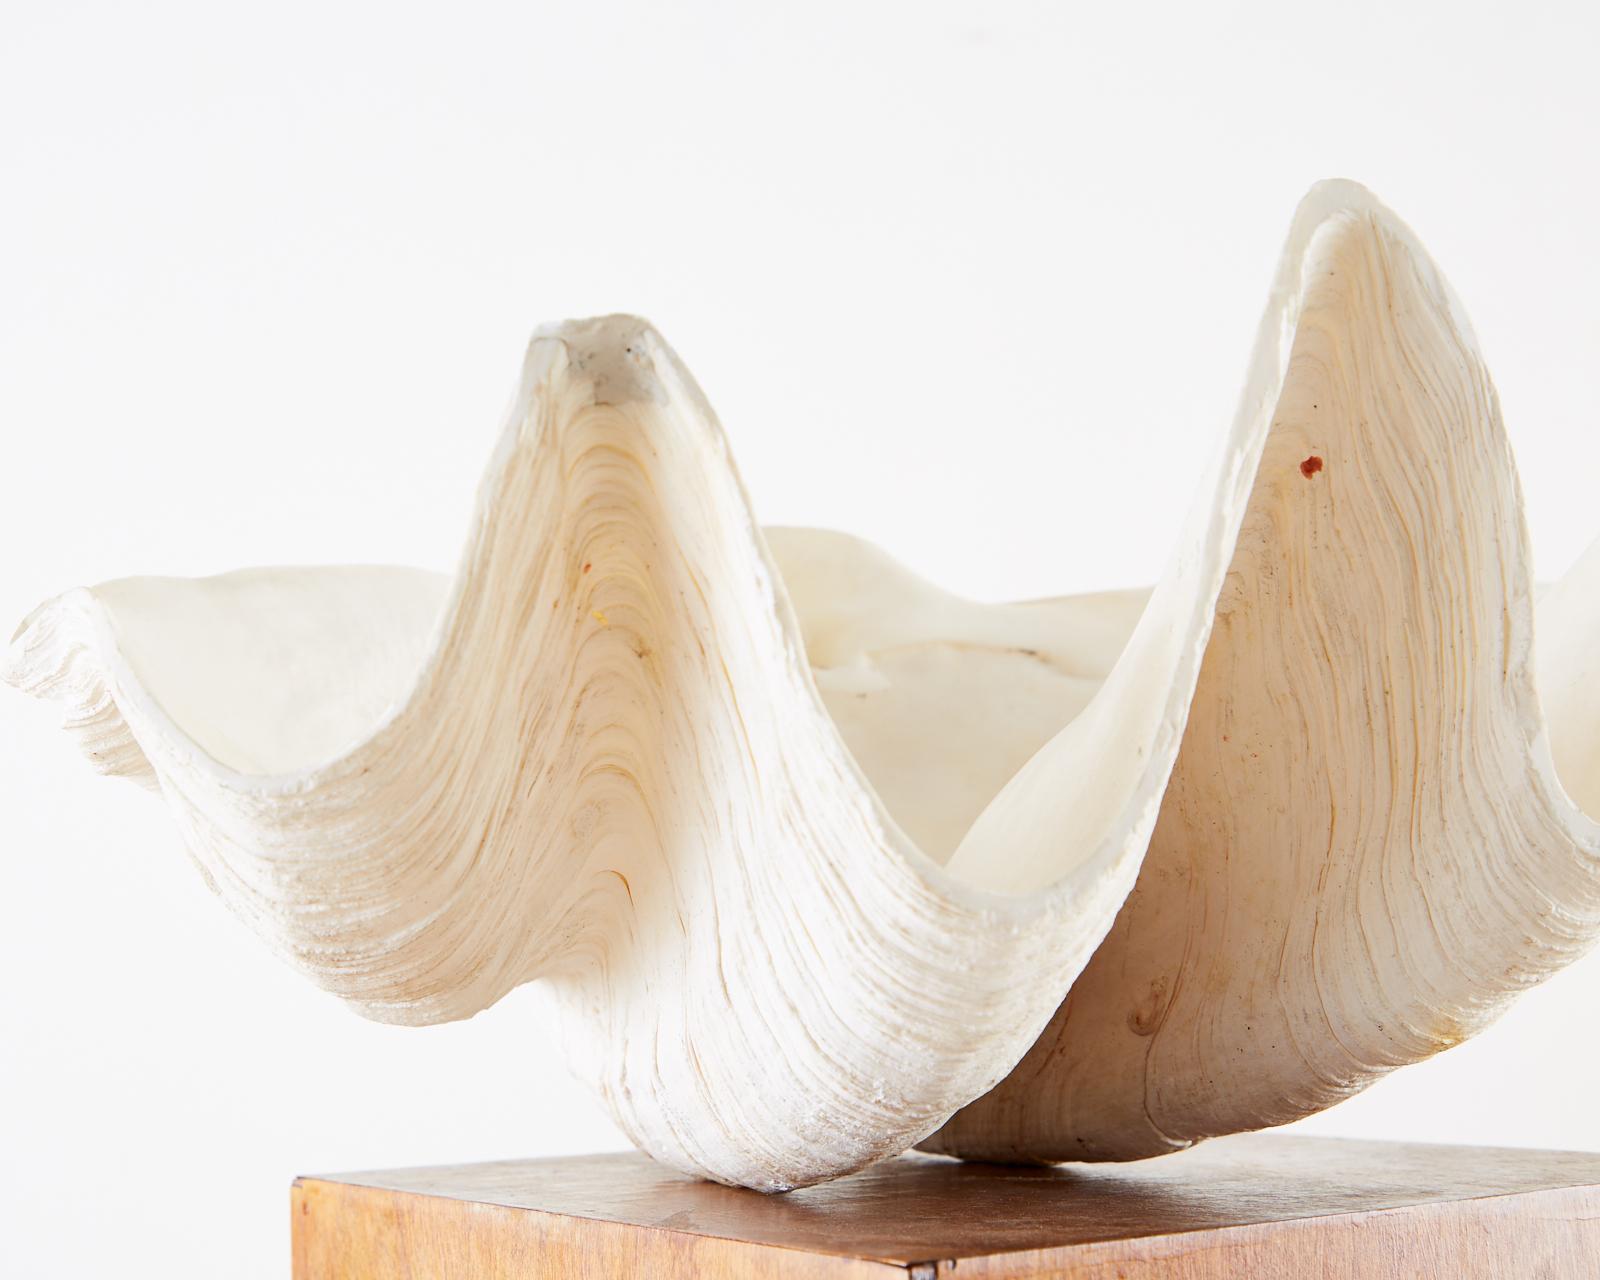 South Pacific Natural Giant Clam Shell Specimen 3